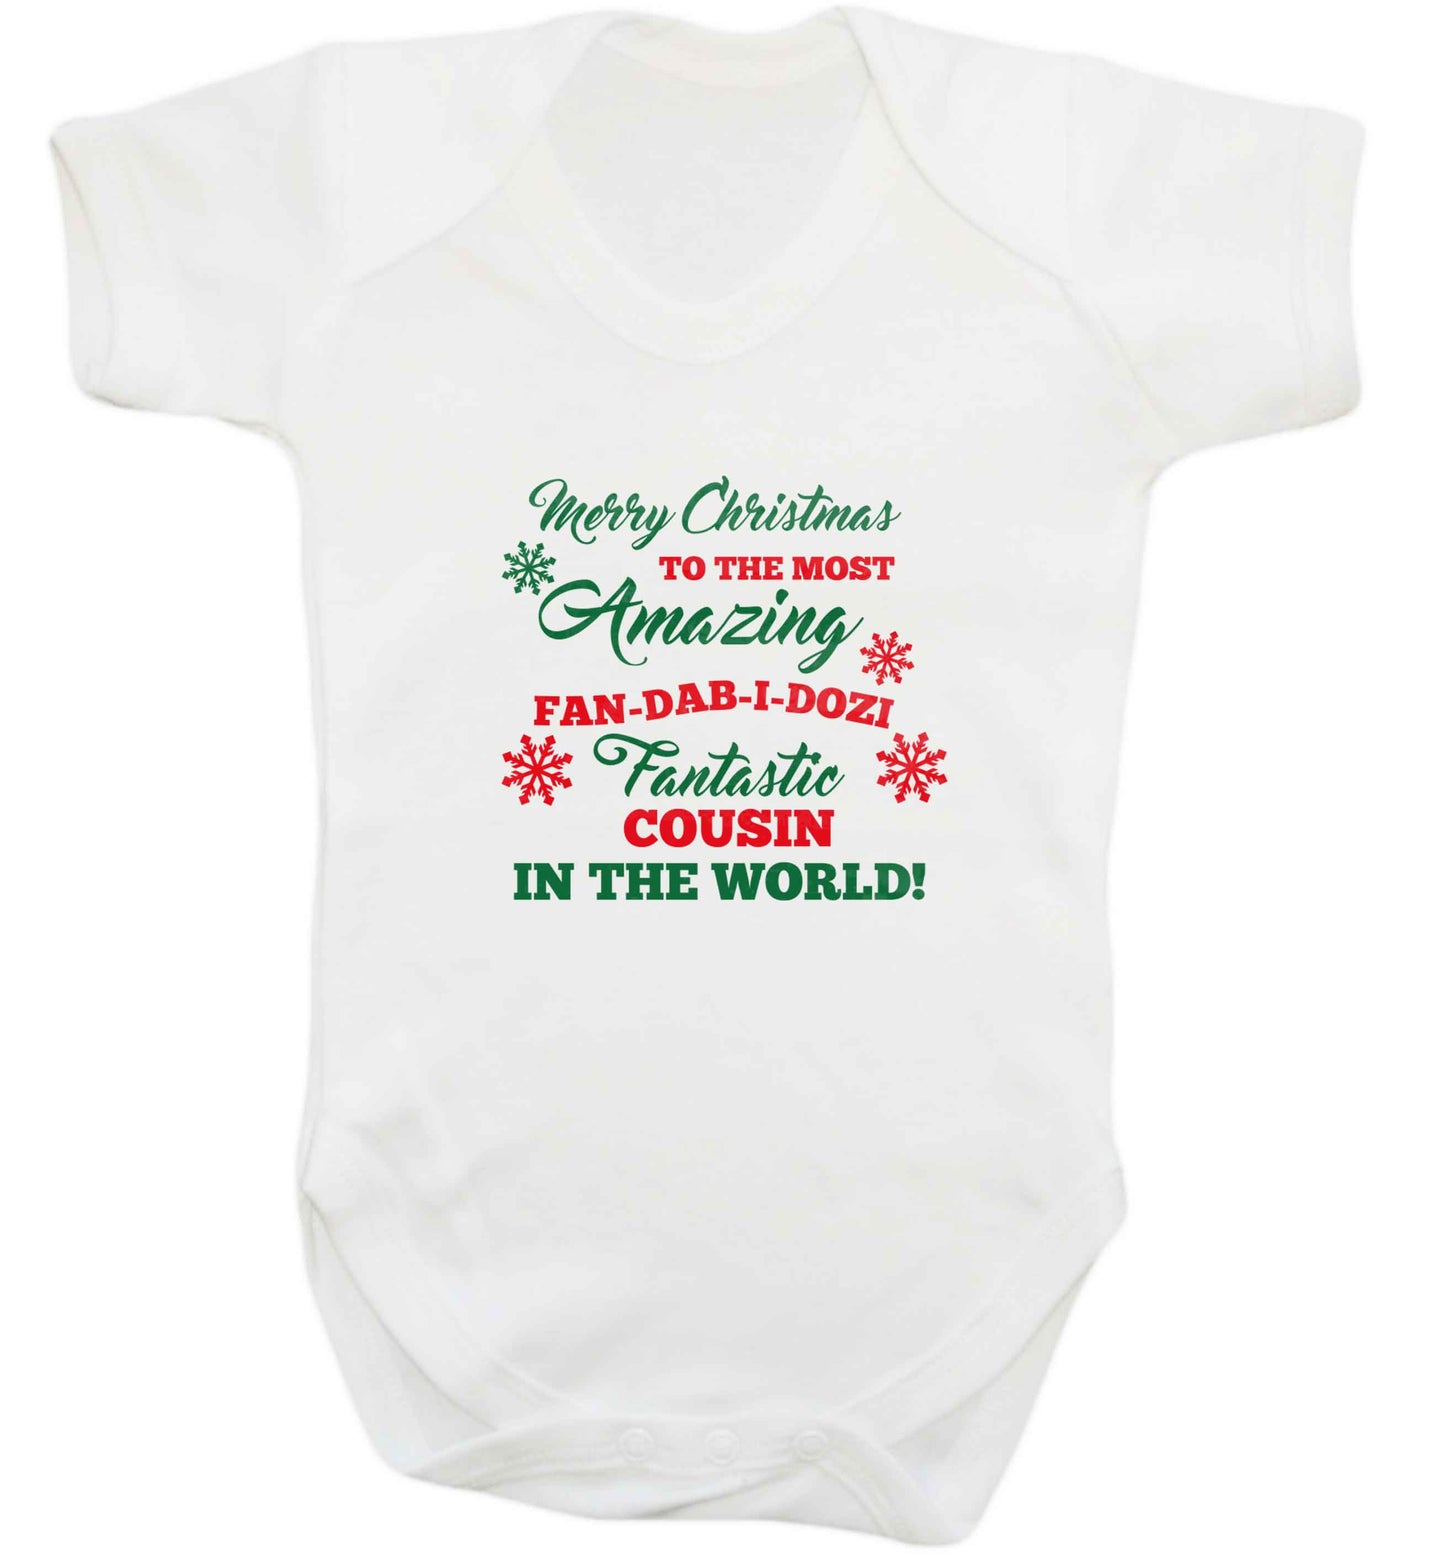 Merry Christmas to the most amazing fan-dab-i-dozi fantasic Cousin in the world baby vest white 18-24 months